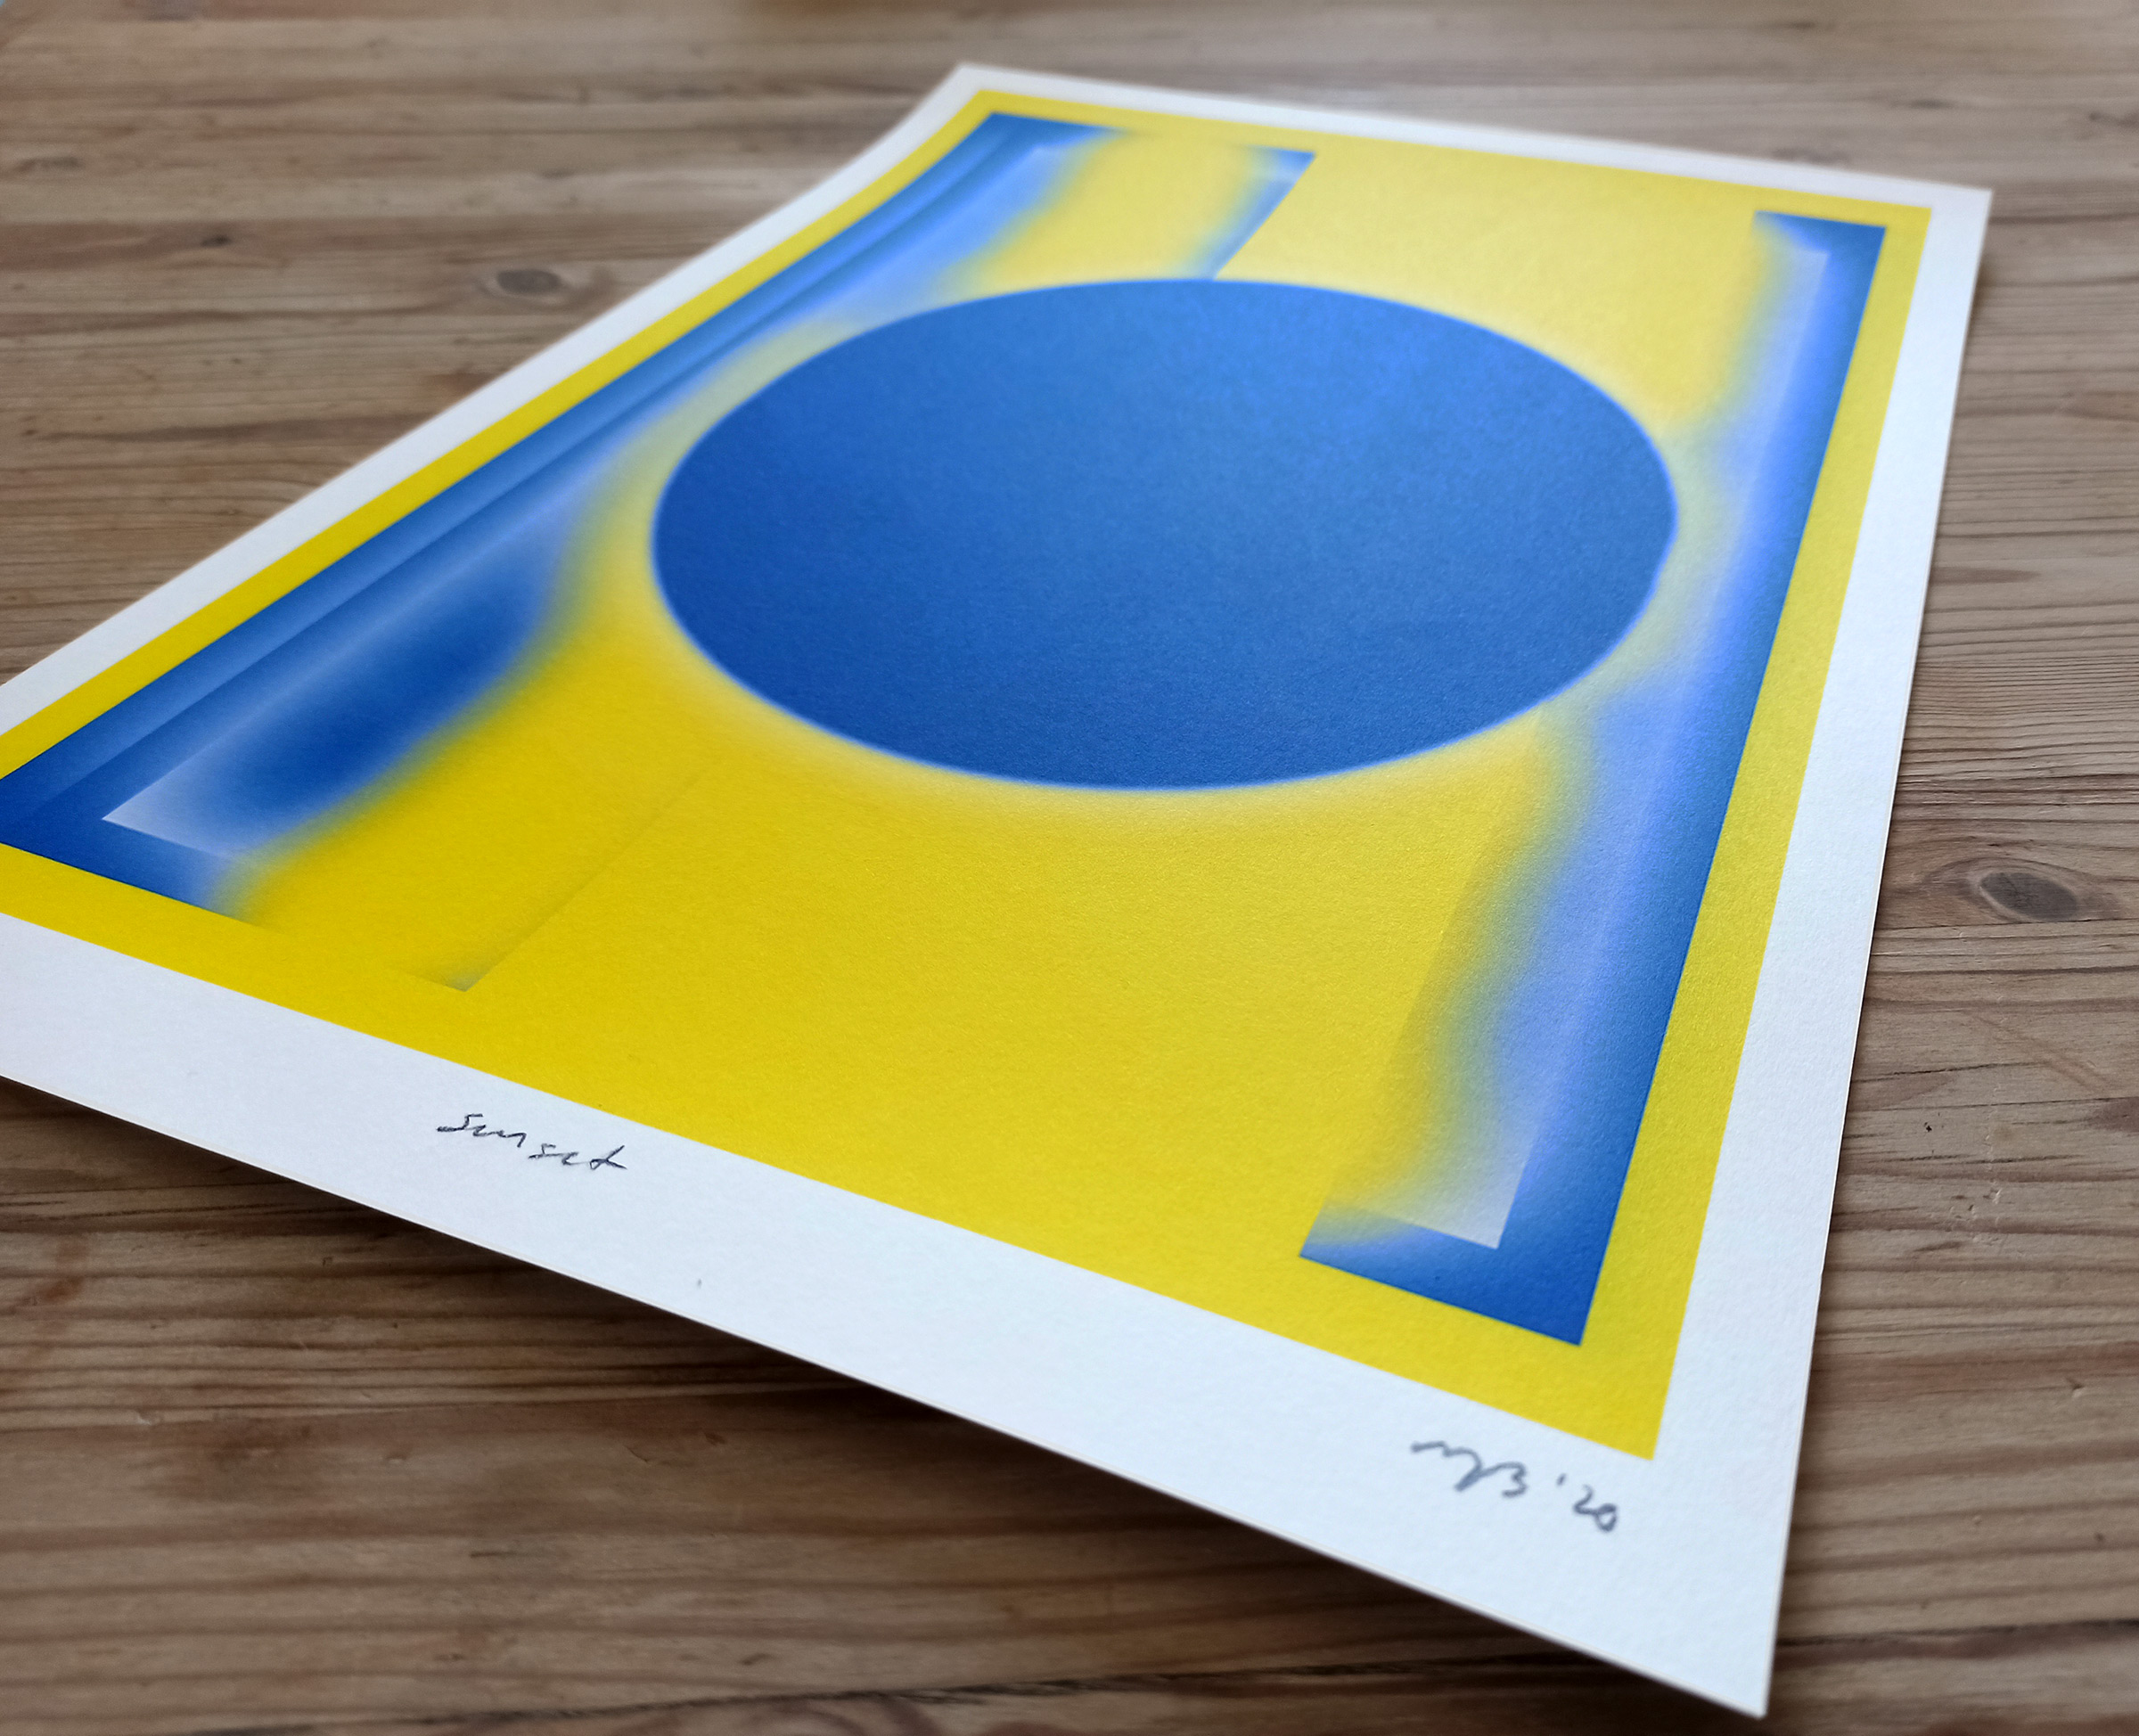 posters-prints, giclee-print, aesthetic, colorful, graphical, minimalistic, pop, architecture, patterns, sky, blue, yellow, ink, paper, beautiful, contemporary-art, copenhagen, danish, design, interior, interior-design, modern, modern-art, nordic, posters, prints, scandinavien, sun, Buy original high quality art. Paintings, drawings, limited edition prints & posters by talented artists.